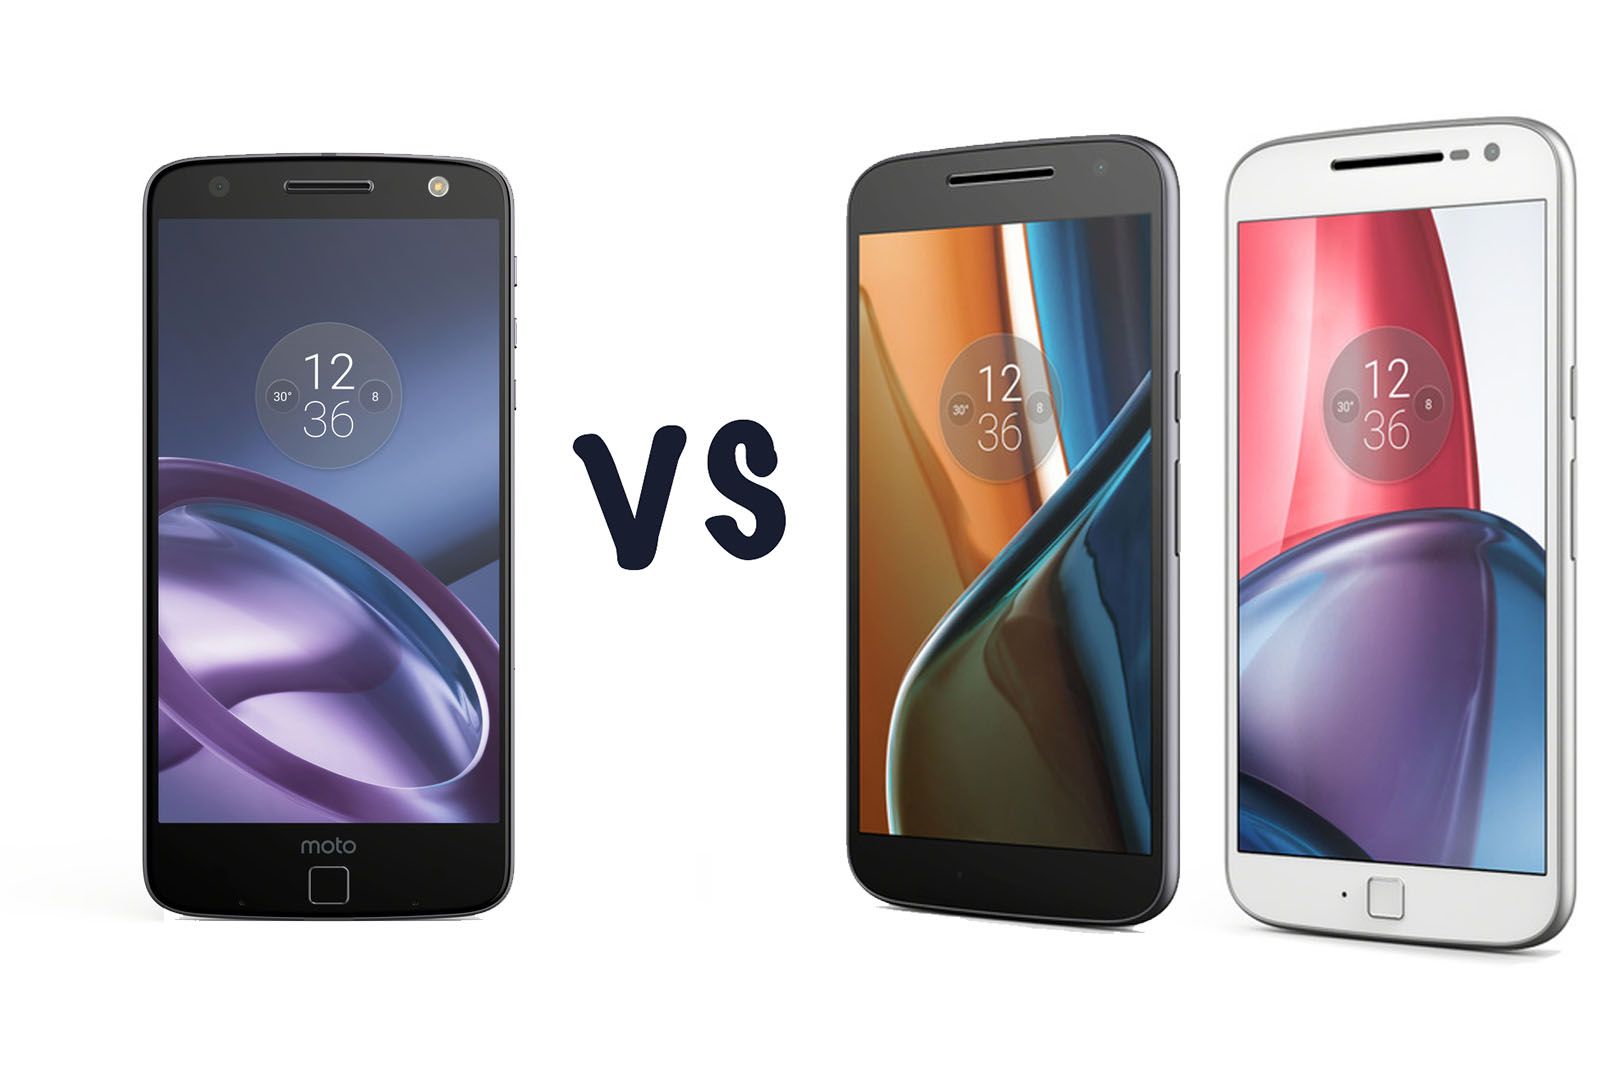 moto z vs moto z force vs moto g4 vs moto g4 plus what s the difference  image 1